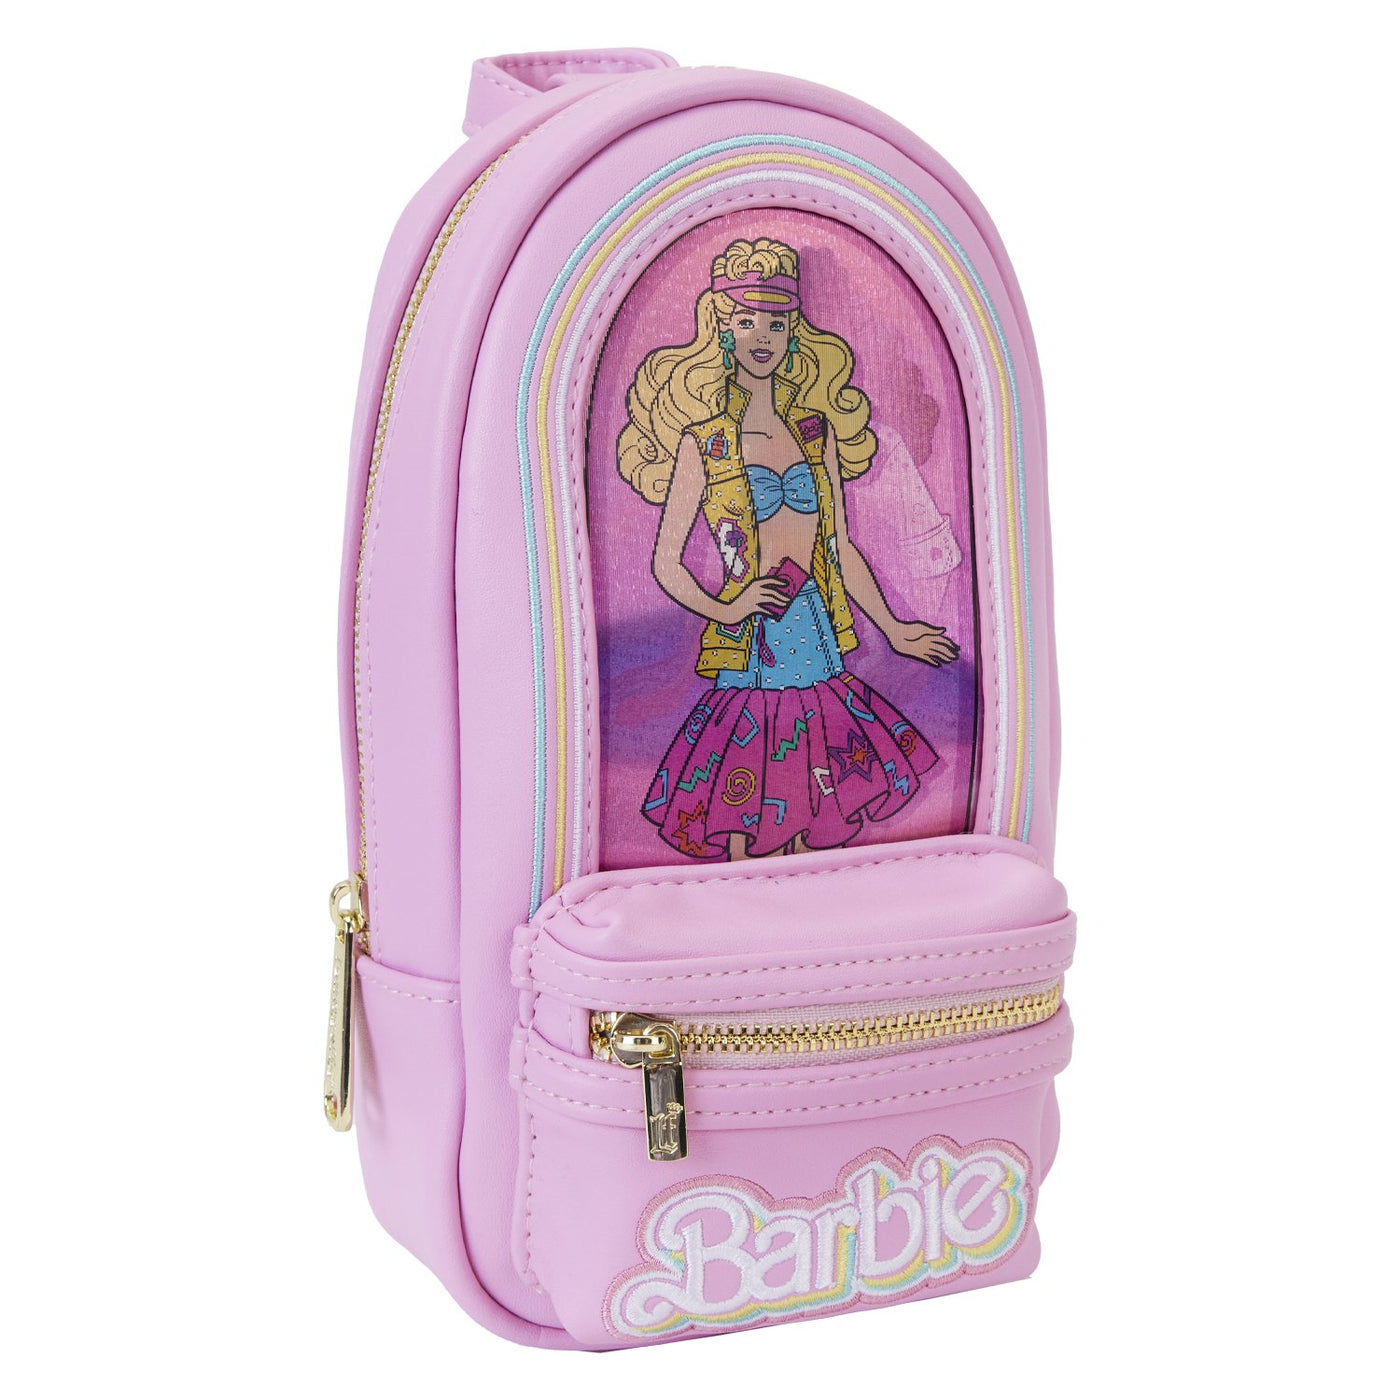 Loungefly Mattel Barbie 65th Anniversary Mini Backpack Pencil Case - Side